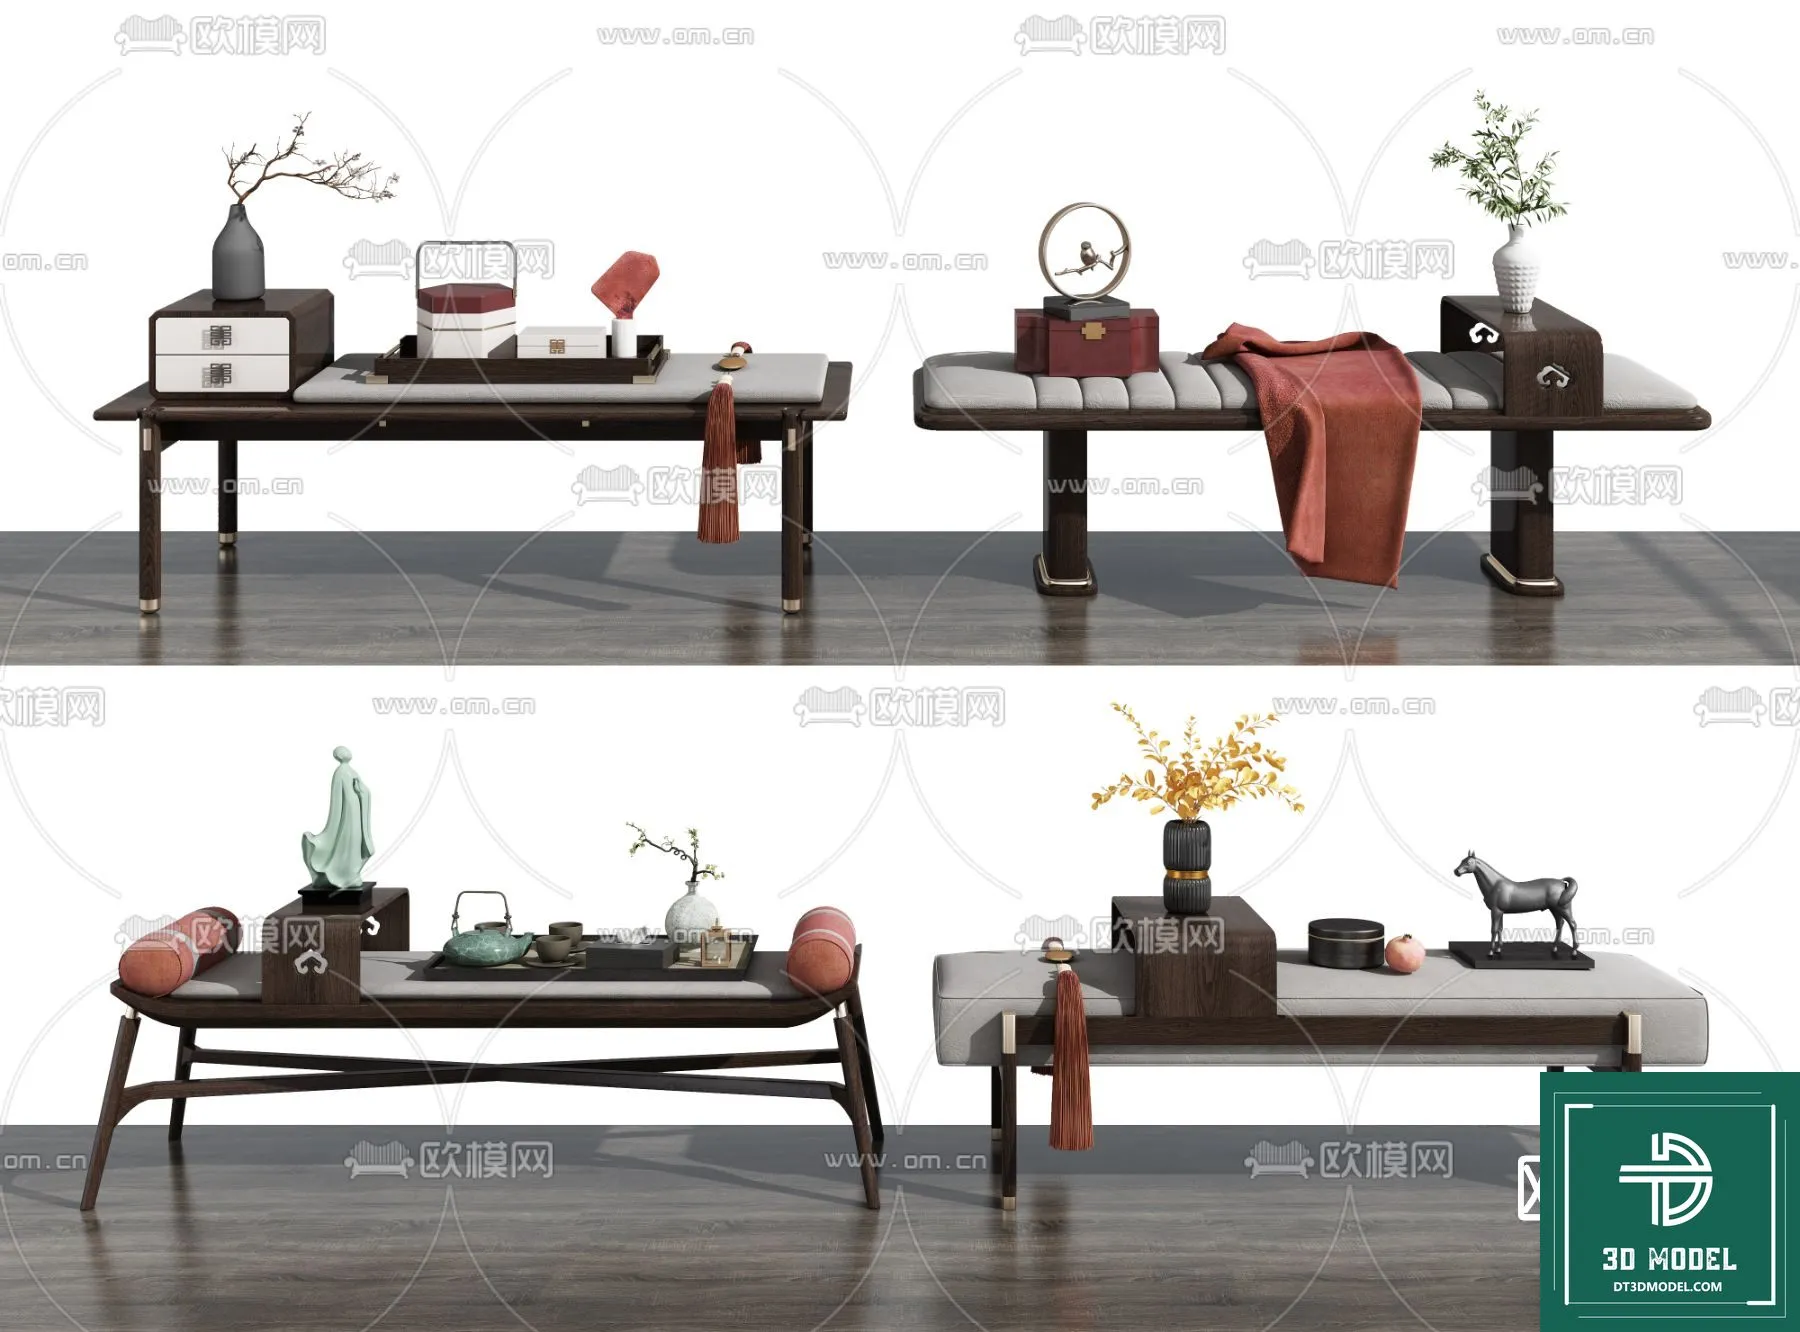 INDOCHINE STYLE – 3D MODELS – 402